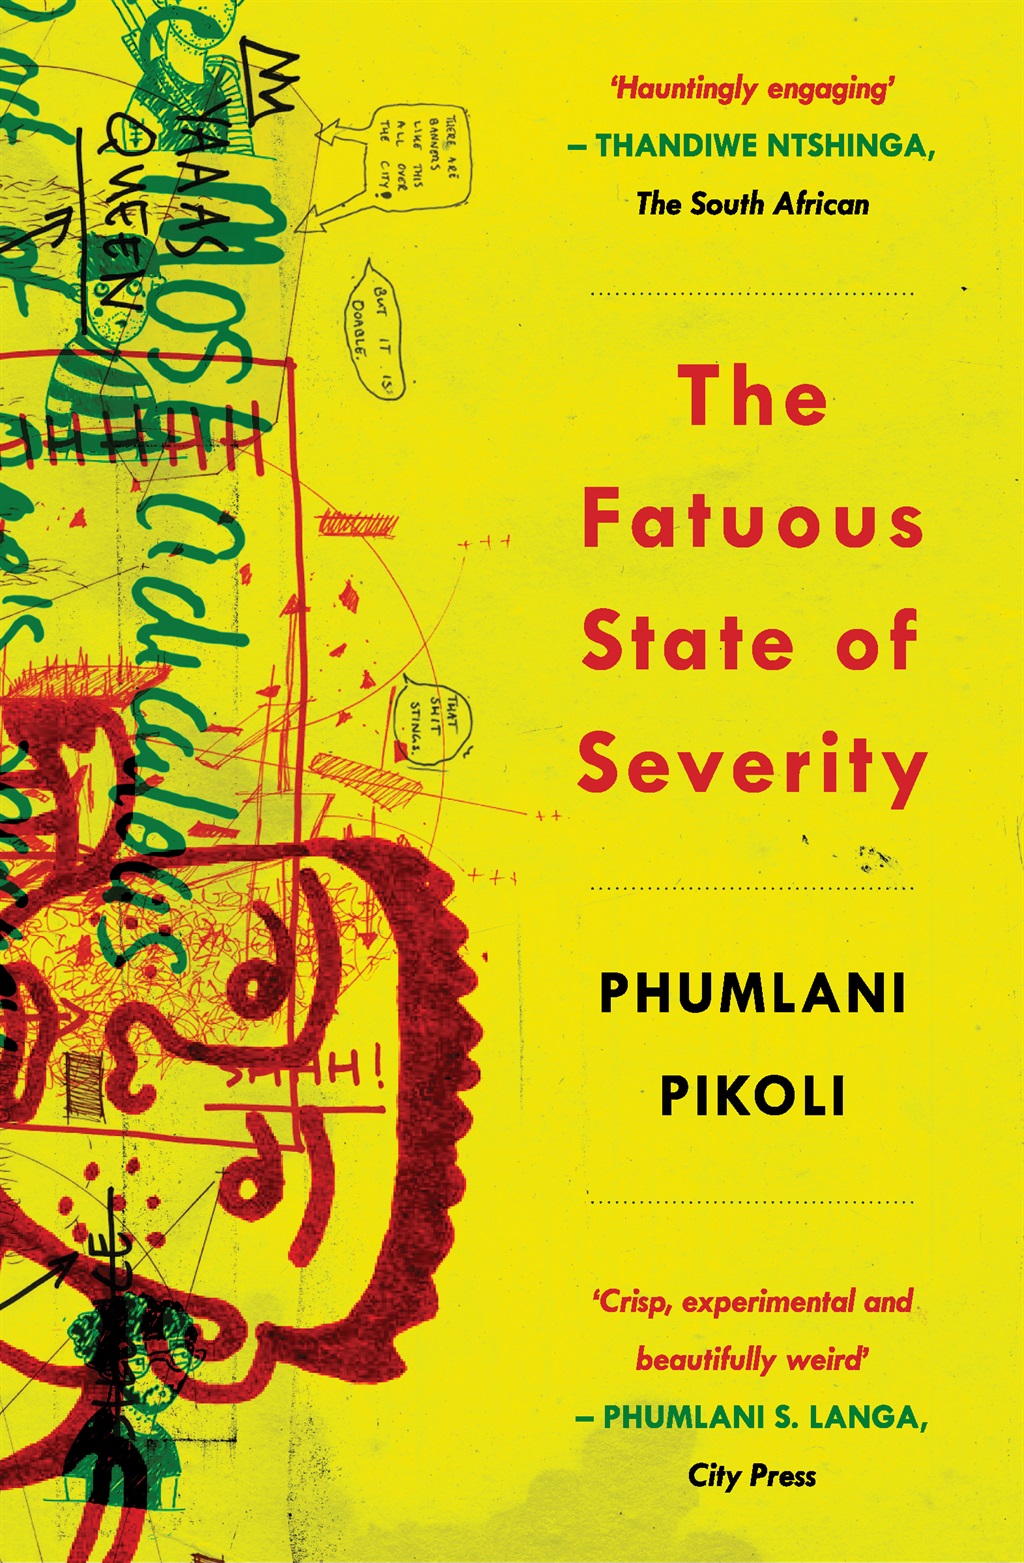 The Fatuous State of Severity